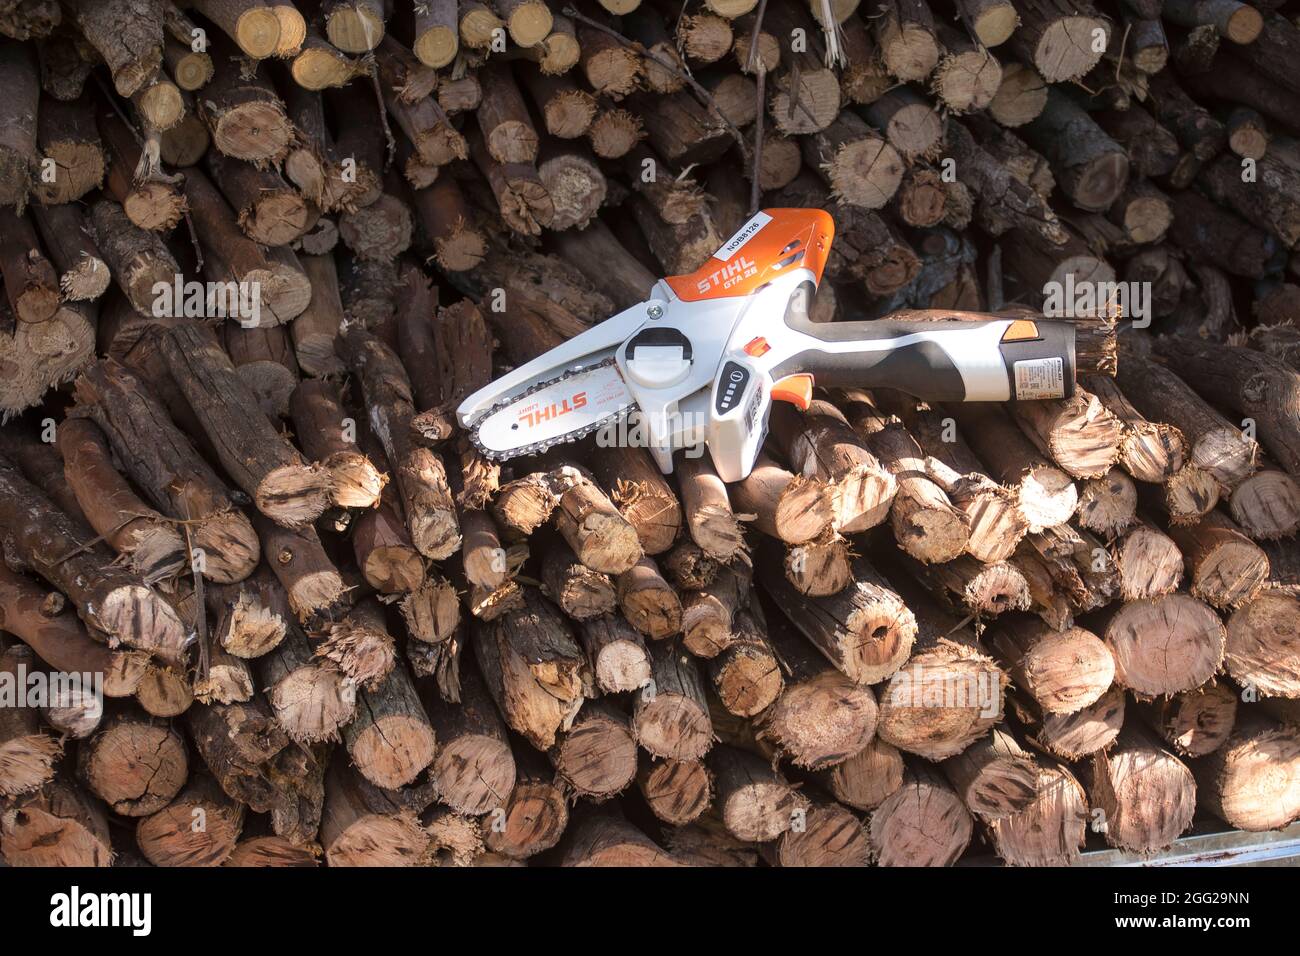 Very small Stihl battery-powerd chainsaw on top of stack of logs (firewood) in storage shed. Fuel for use in wood-burning stove, Queensland, Australia Stock Photo